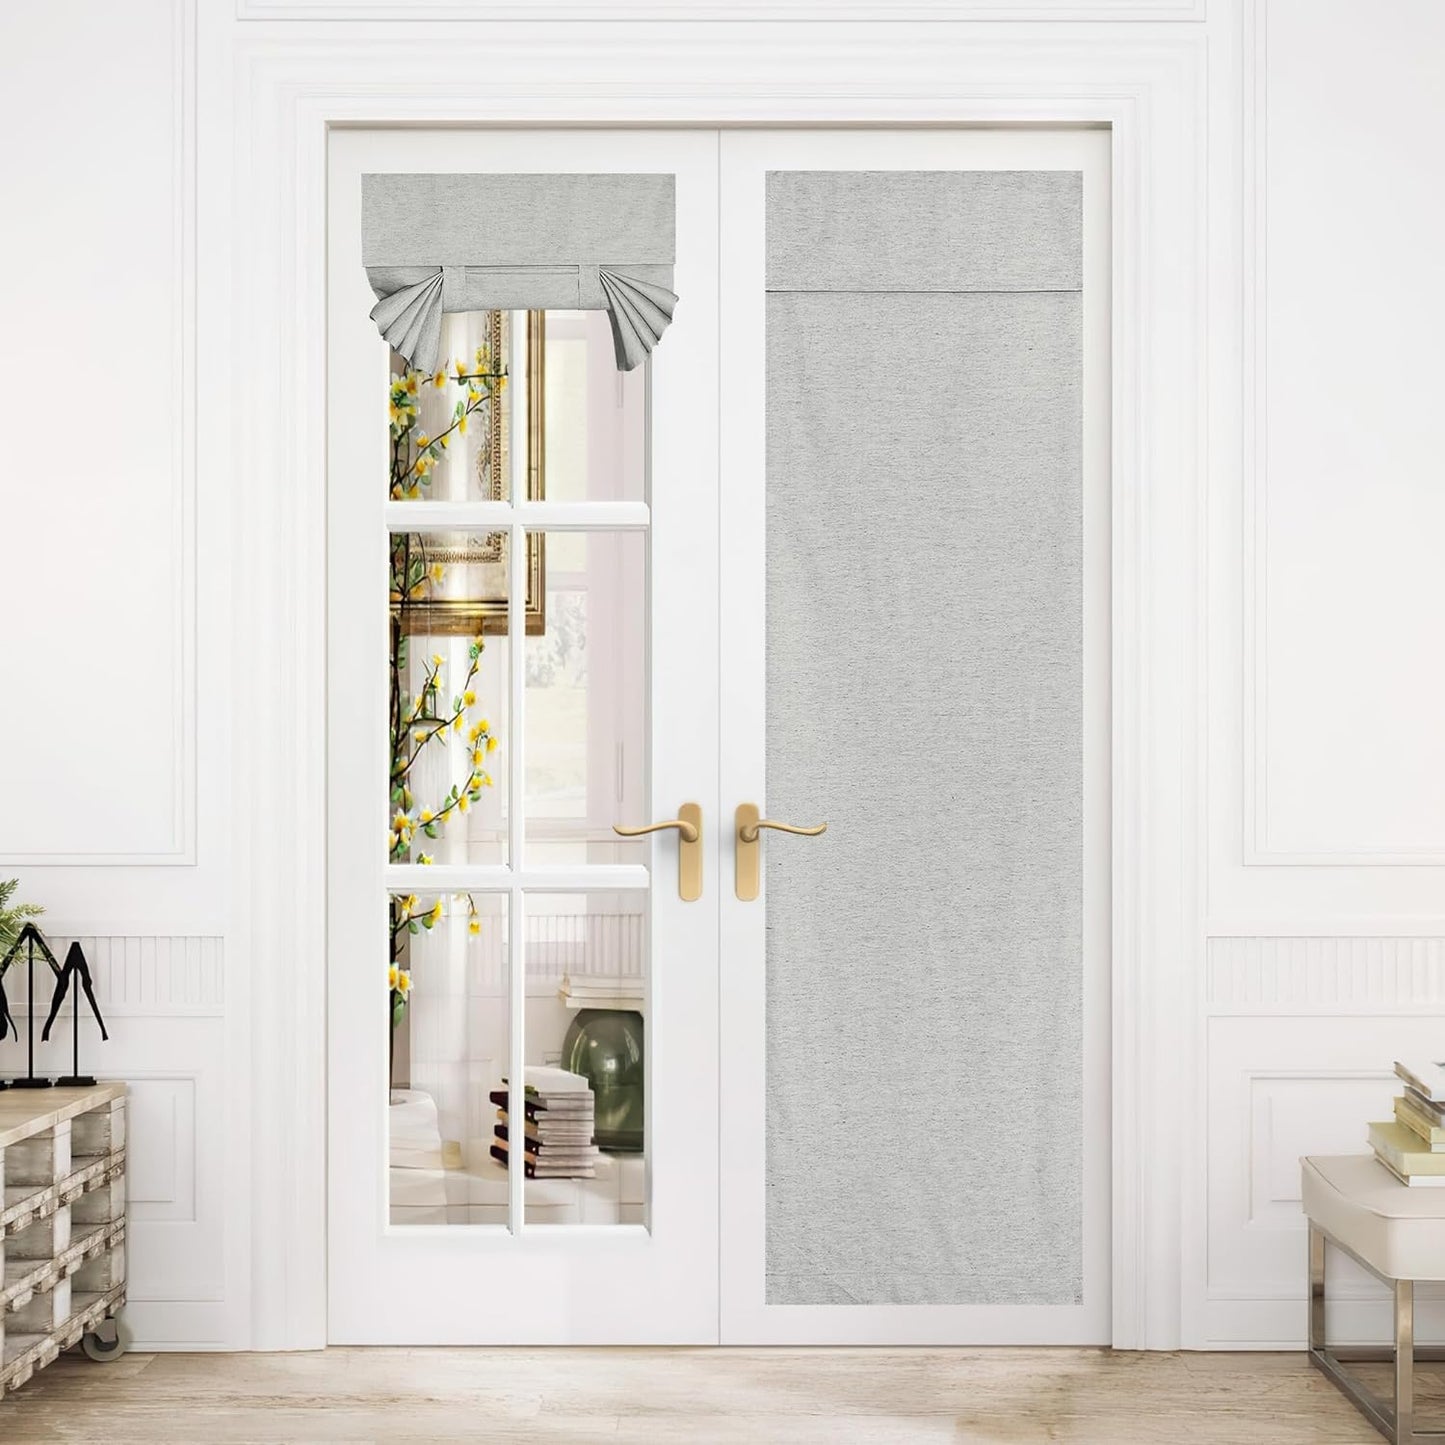 NICETOWN Linen Door Curtain for Door Window, Farmhouse French Door Curtain Shade for Kitchen Bathroom Energy Saving 100% Blackout Tie up Shade for Patio Sliding Glass, 1 Panel, Natural, 26" W X 72" L  NICETOWN Light Grey W26 X L80 